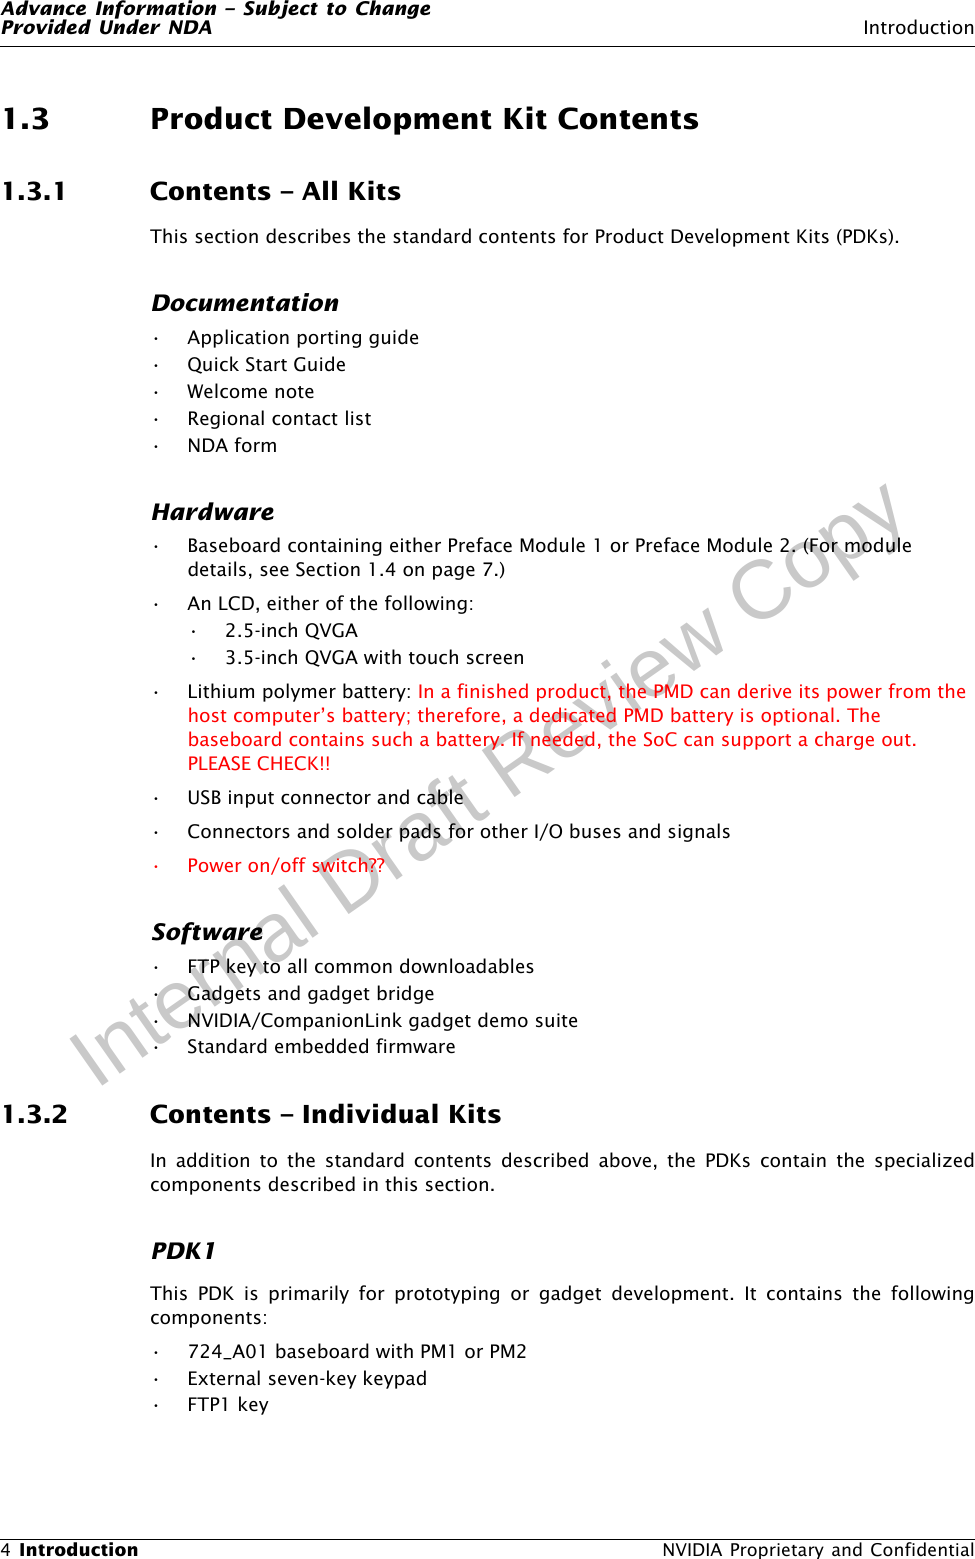 Advance Information – Subject to ChangeProvided Under NDA Introduction4 Introduction  NVIDIA Proprietary and ConfidentialInternal Draft Review Copy1.3 Product Development Kit Contents1.3.1 Contents – All KitsThis section describes the standard contents for Product Development Kits (PDKs).Documentation• Application porting guide•Quick Start Guide•Welcome note• Regional contact list•NDA formHardware• Baseboard containing either Preface Module 1 or Preface Module 2. (For module details, see Section 1.4 on page 7.)• An LCD, either of the following:• 2.5-inch QVGA• 3.5-inch QVGA with touch screen • Lithium polymer battery: In a finished product, the PMD can derive its power from the host computer’s battery; therefore, a dedicated PMD battery is optional. The baseboard contains such a battery. If needed, the SoC can support a charge out. PLEASE CHECK!!• USB input connector and cable• Connectors and solder pads for other I/O buses and signals• Power on/off switch??Software• FTP key to all common downloadables• Gadgets and gadget bridge• NVIDIA/CompanionLink gadget demo suite• Standard embedded firmware1.3.2 Contents – Individual KitsIn addition to the standard contents described above, the PDKs contain the specializedcomponents described in this section.PDK1This PDK is primarily for prototyping or gadget development. It contains the followingcomponents:• 724_A01 baseboard with PM1 or PM2• External seven-key keypad•FTP1 key